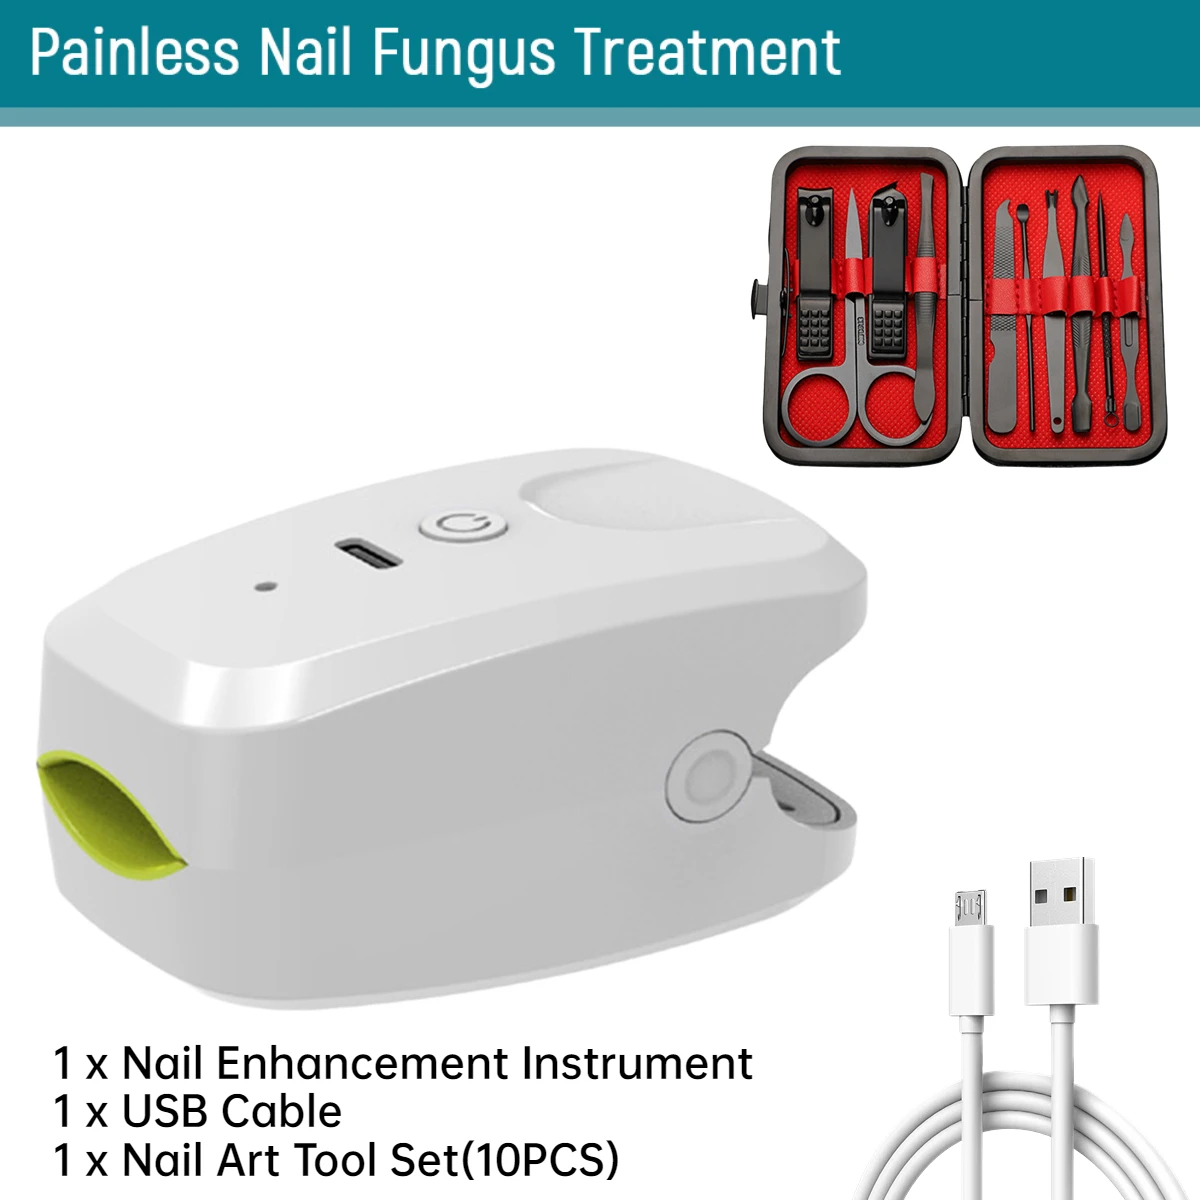 Laser treatment for nail fungus: What to expect and cost